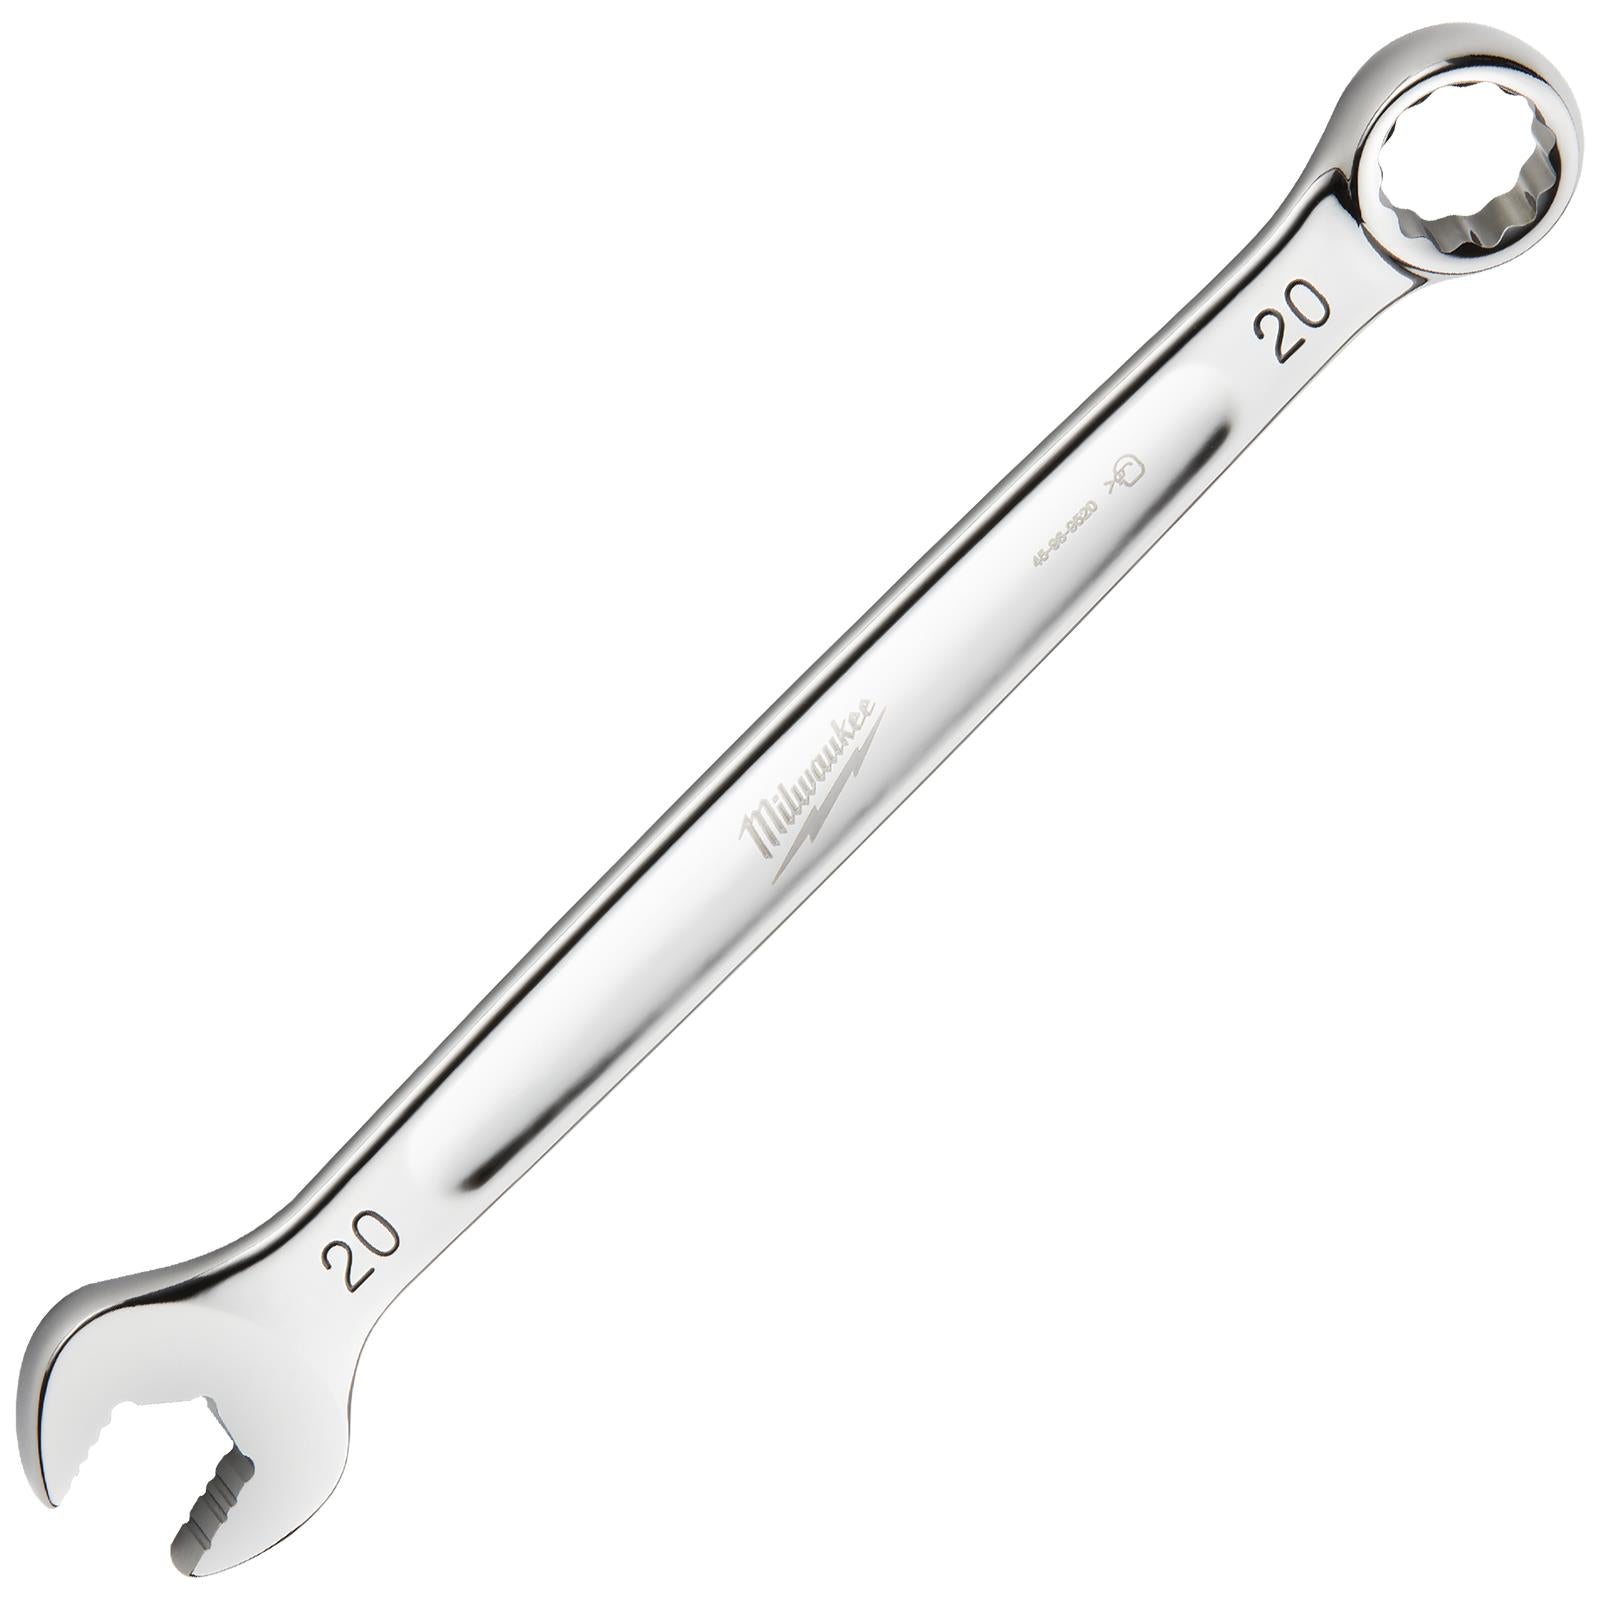 Milwaukee Combination Spanner MAX BITE 20mm Length 262mm